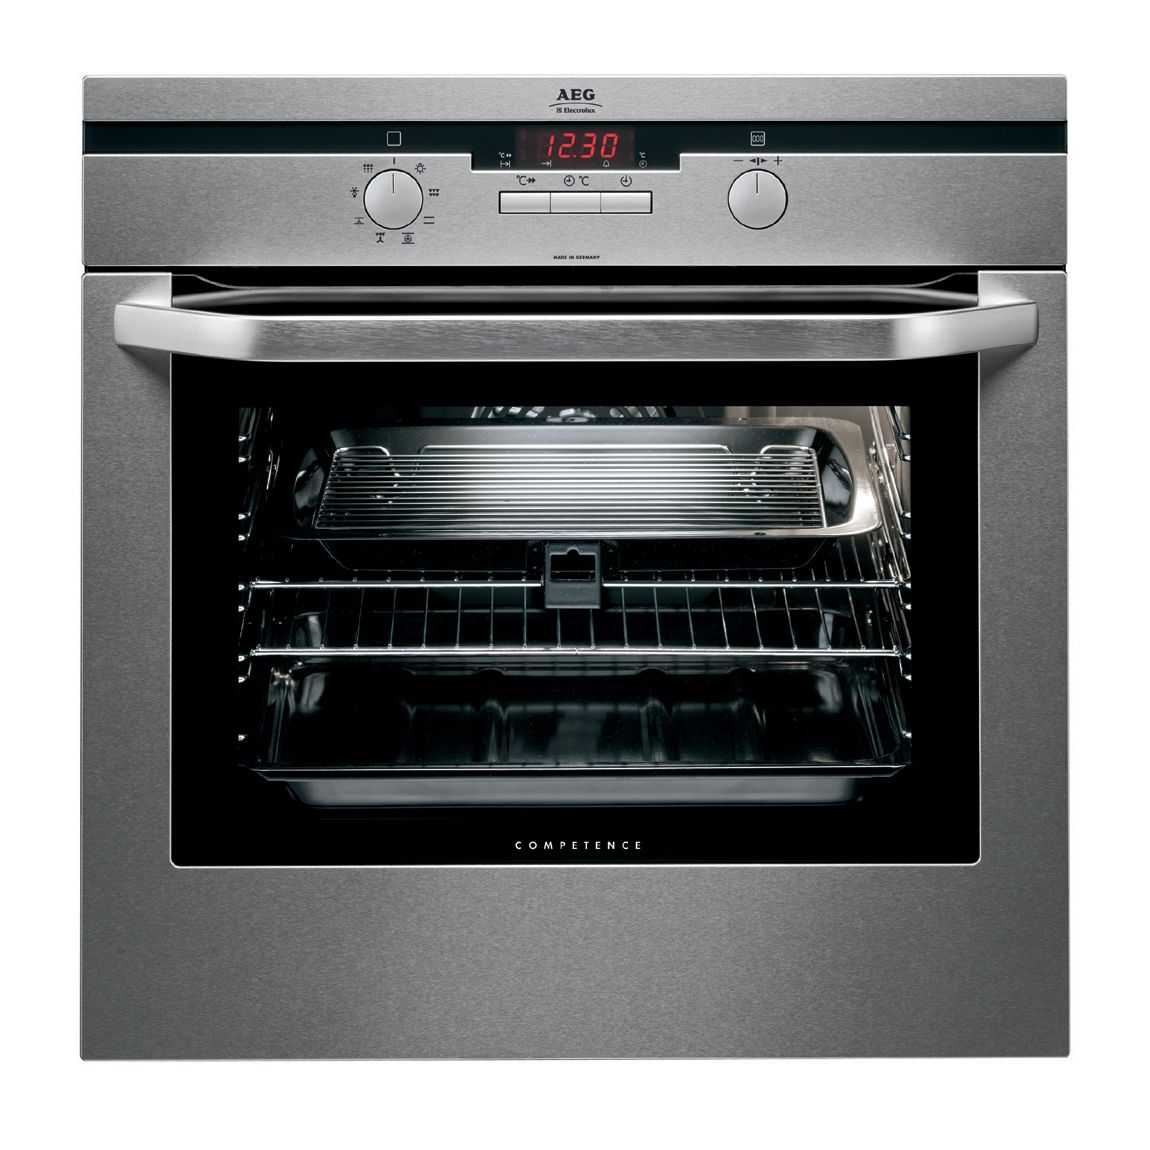 AEG B57415M Single Electric Oven, Stainless Steel at John Lewis